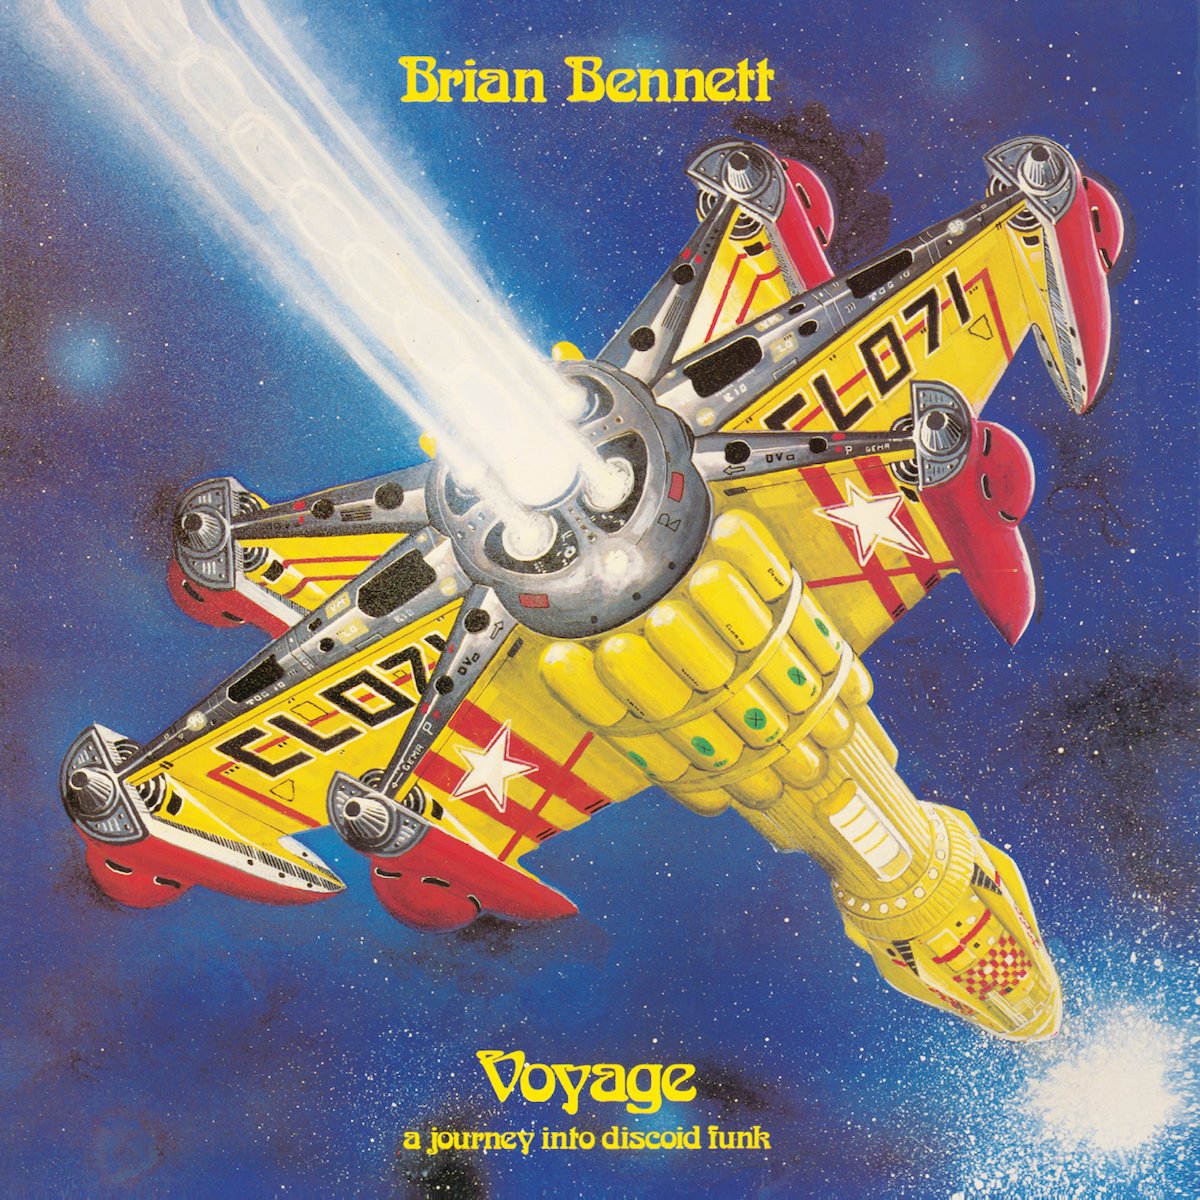 After leaving The Shadows in the 1960s, drummer Brian Bennett delved into solo projects, blending his talents with soundtrack and library music compositions. His 1978 album, Voyage (A Journey Into Discoid Funk), stands as a testament to his innovative spirit, combining...